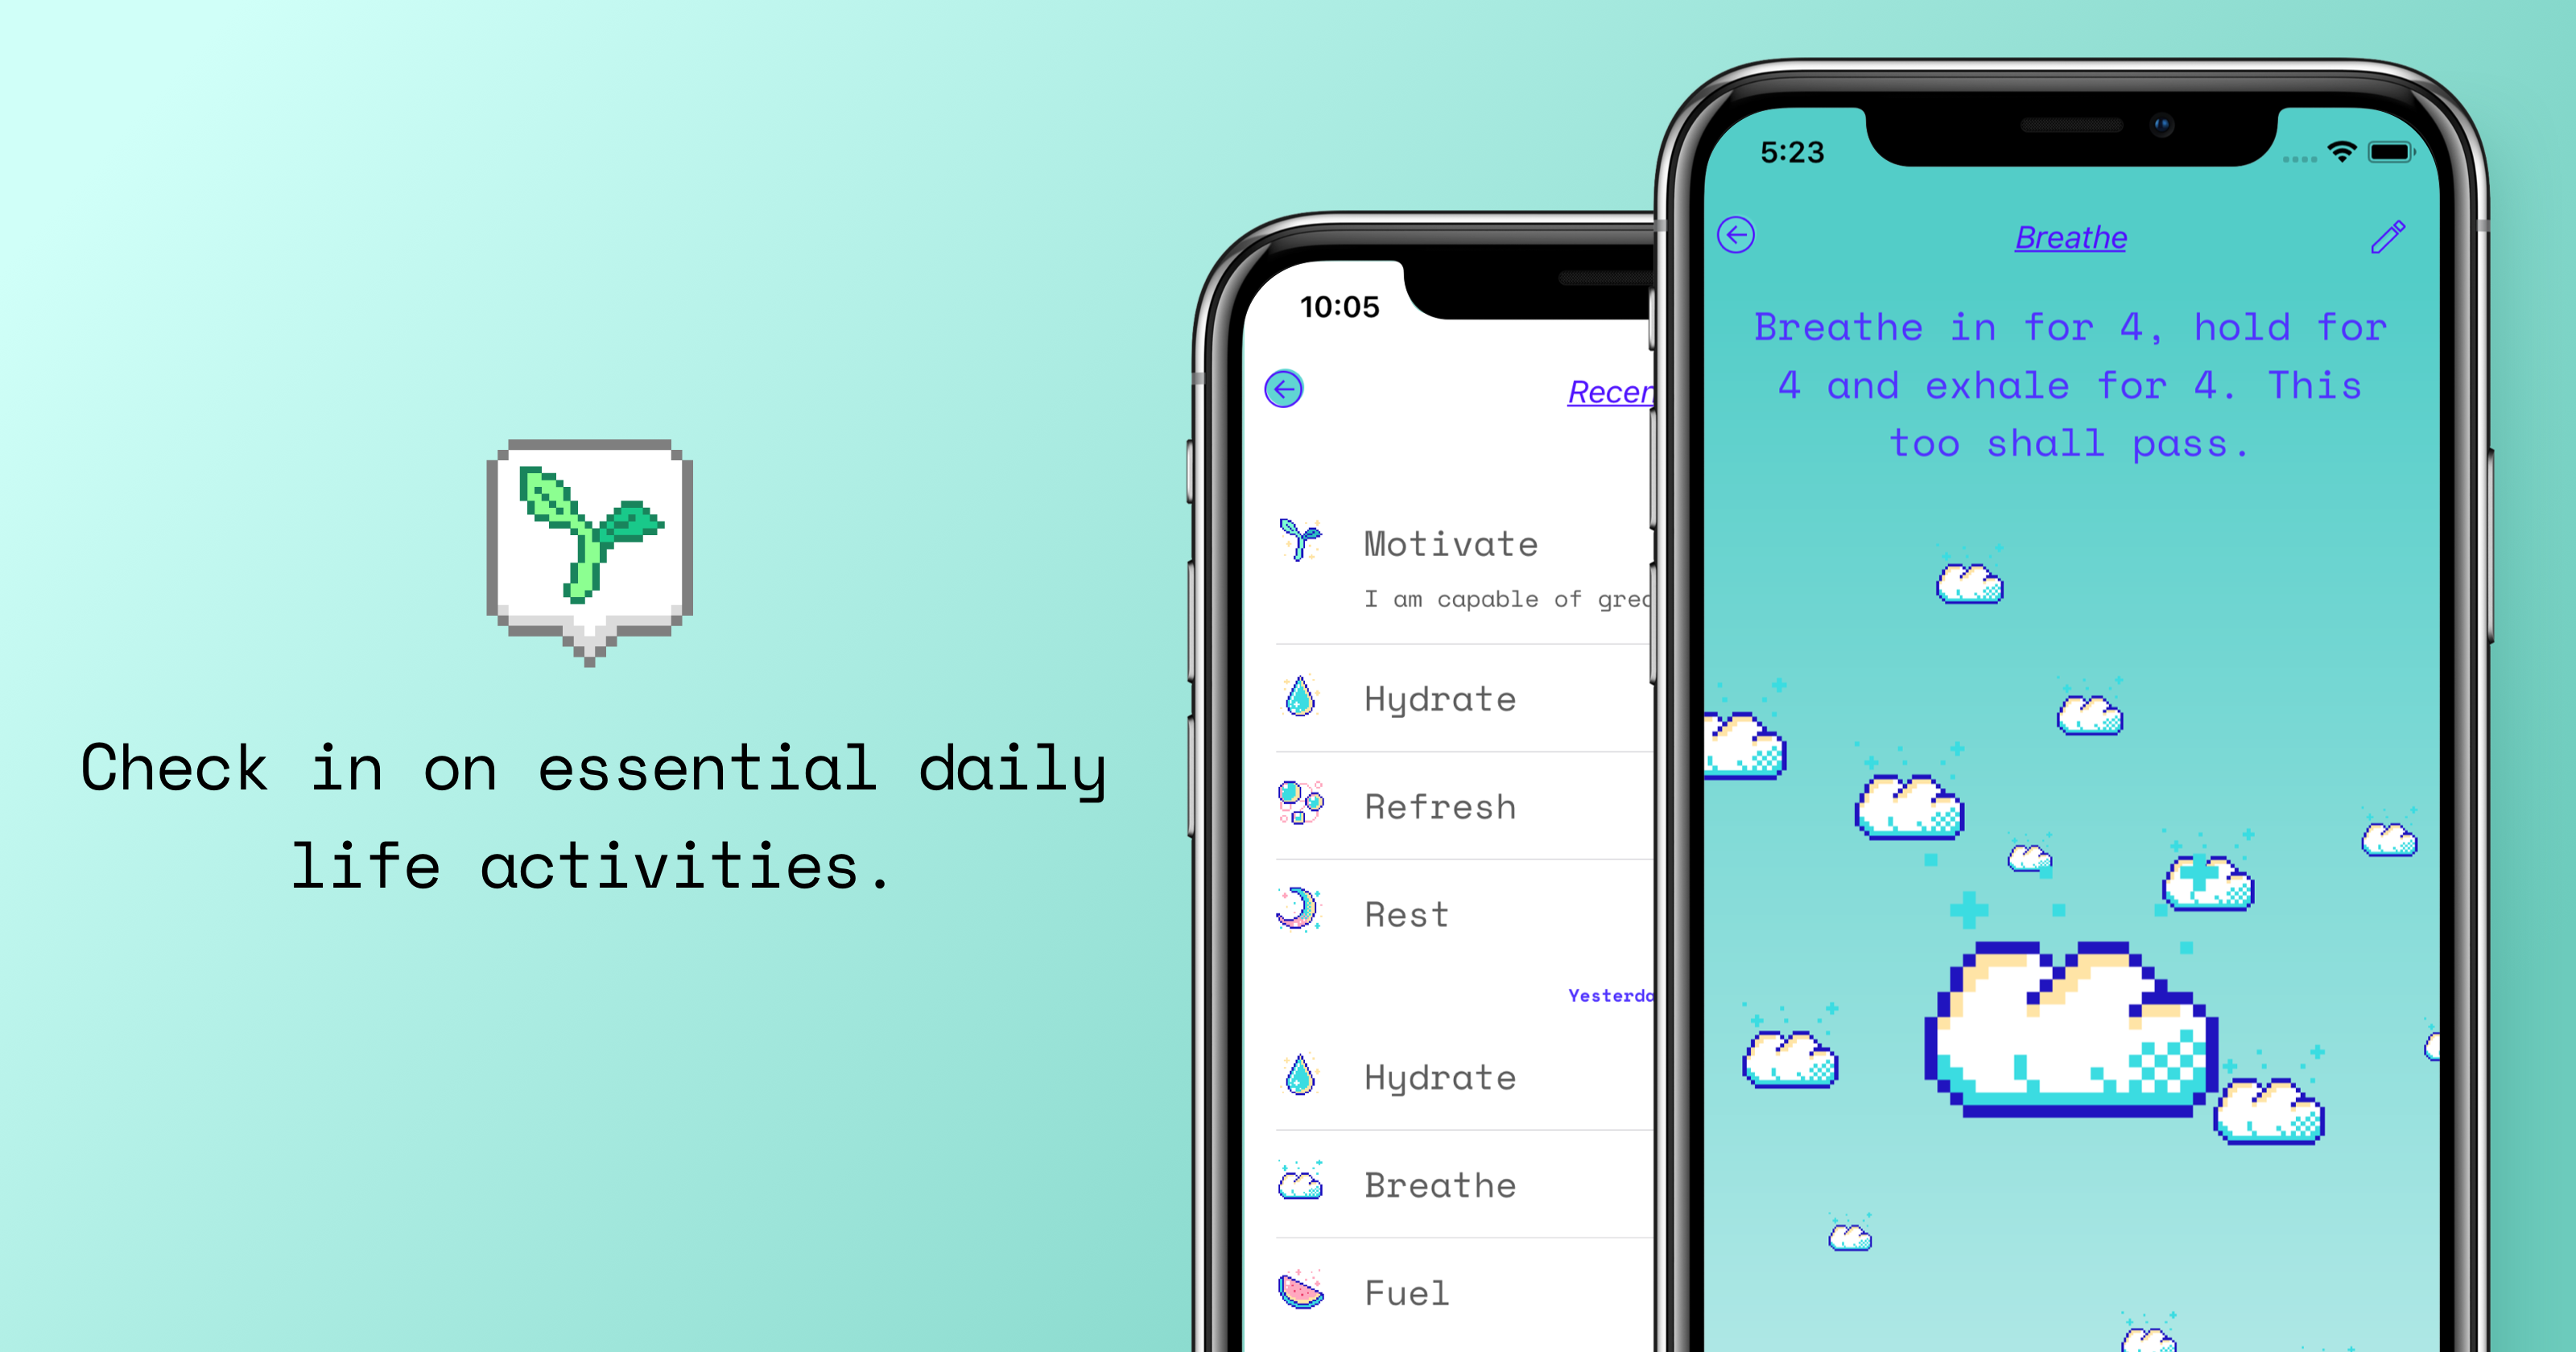 App Store artwork featuring Aloe Bud, a self-care pocket companion, with text saying "Check in on essential daily life activities."